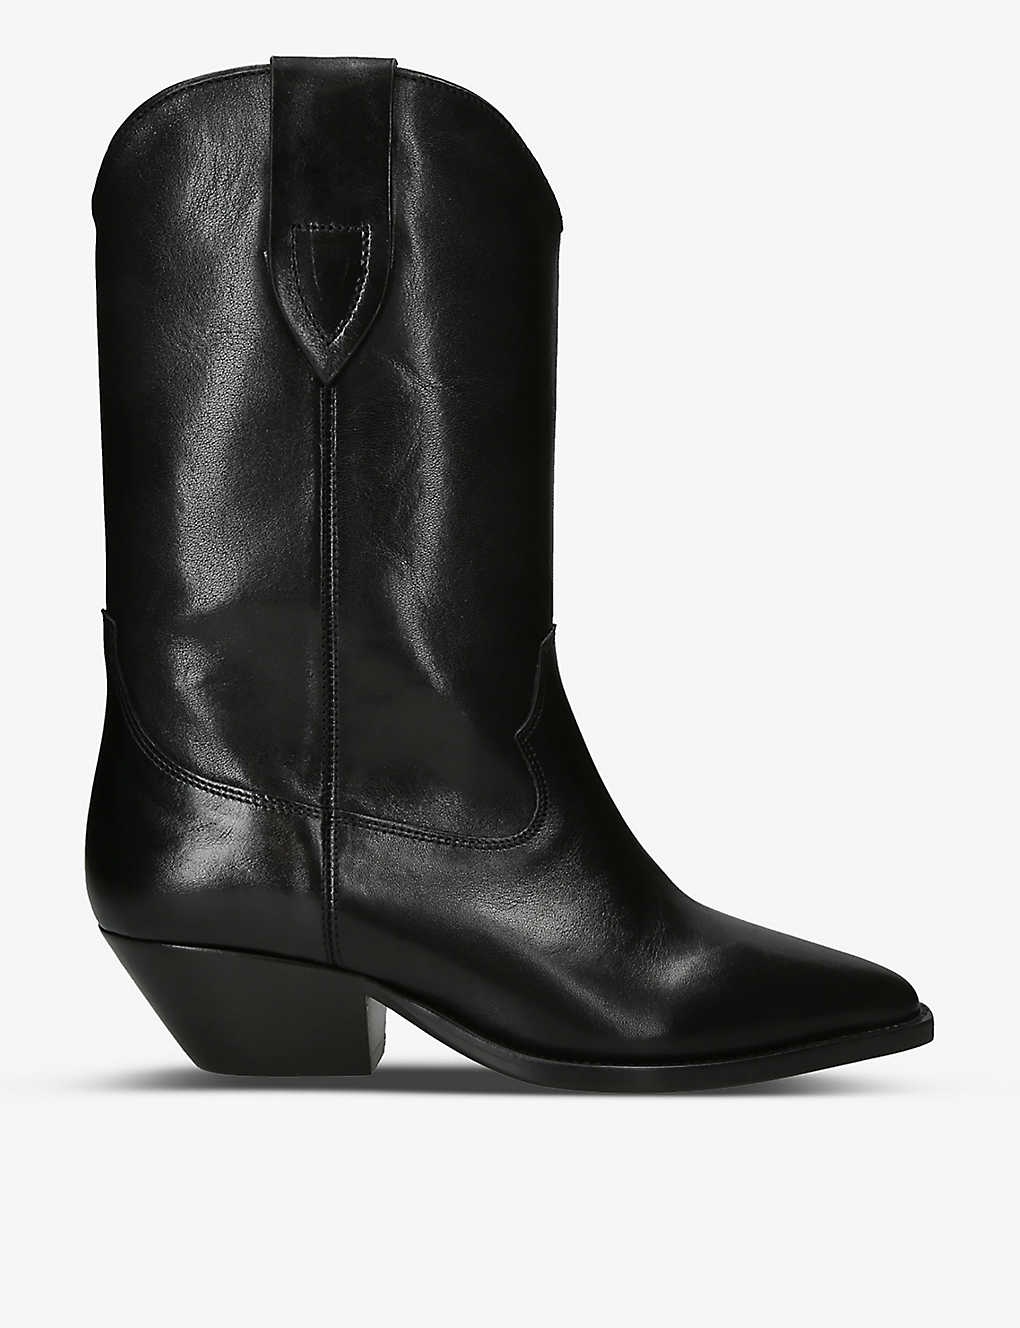 Duerto pointed-toe leather heeled cowboy boots - 1